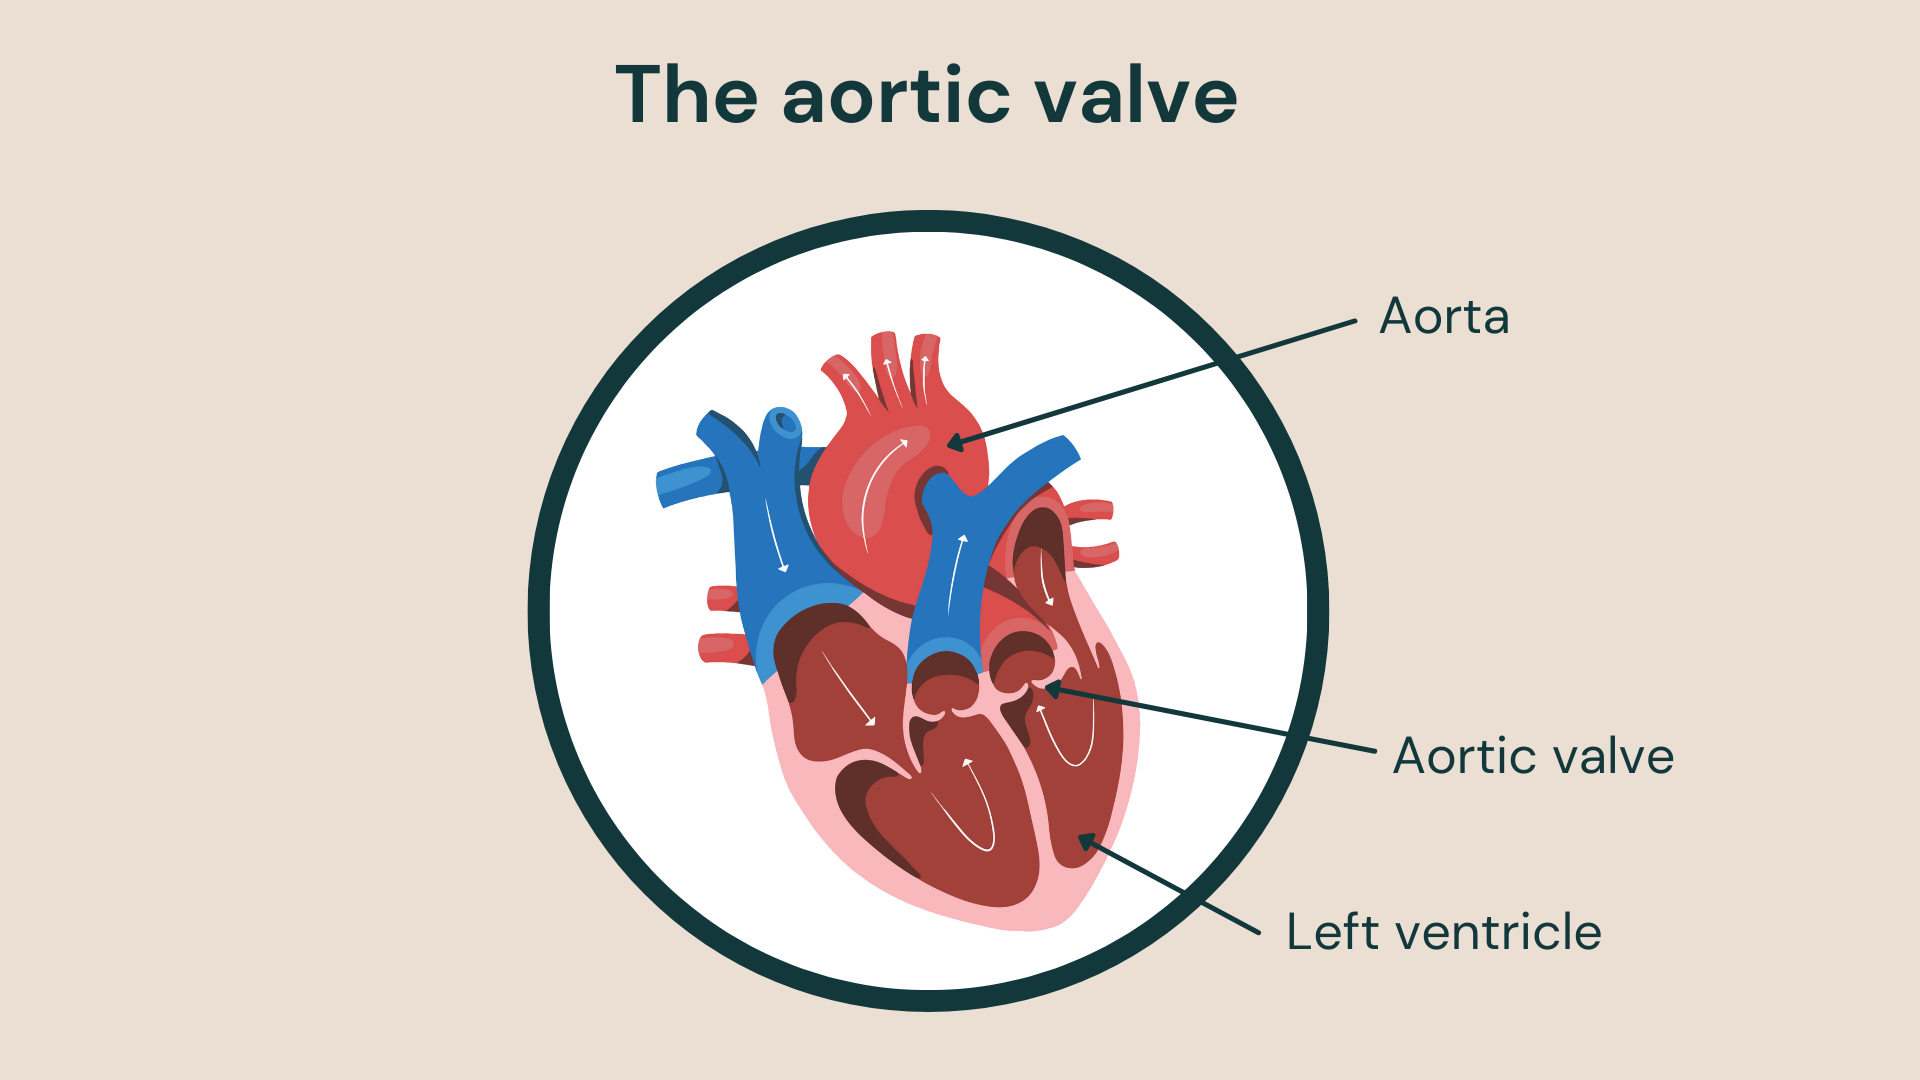 Illustration showing the aortic valve